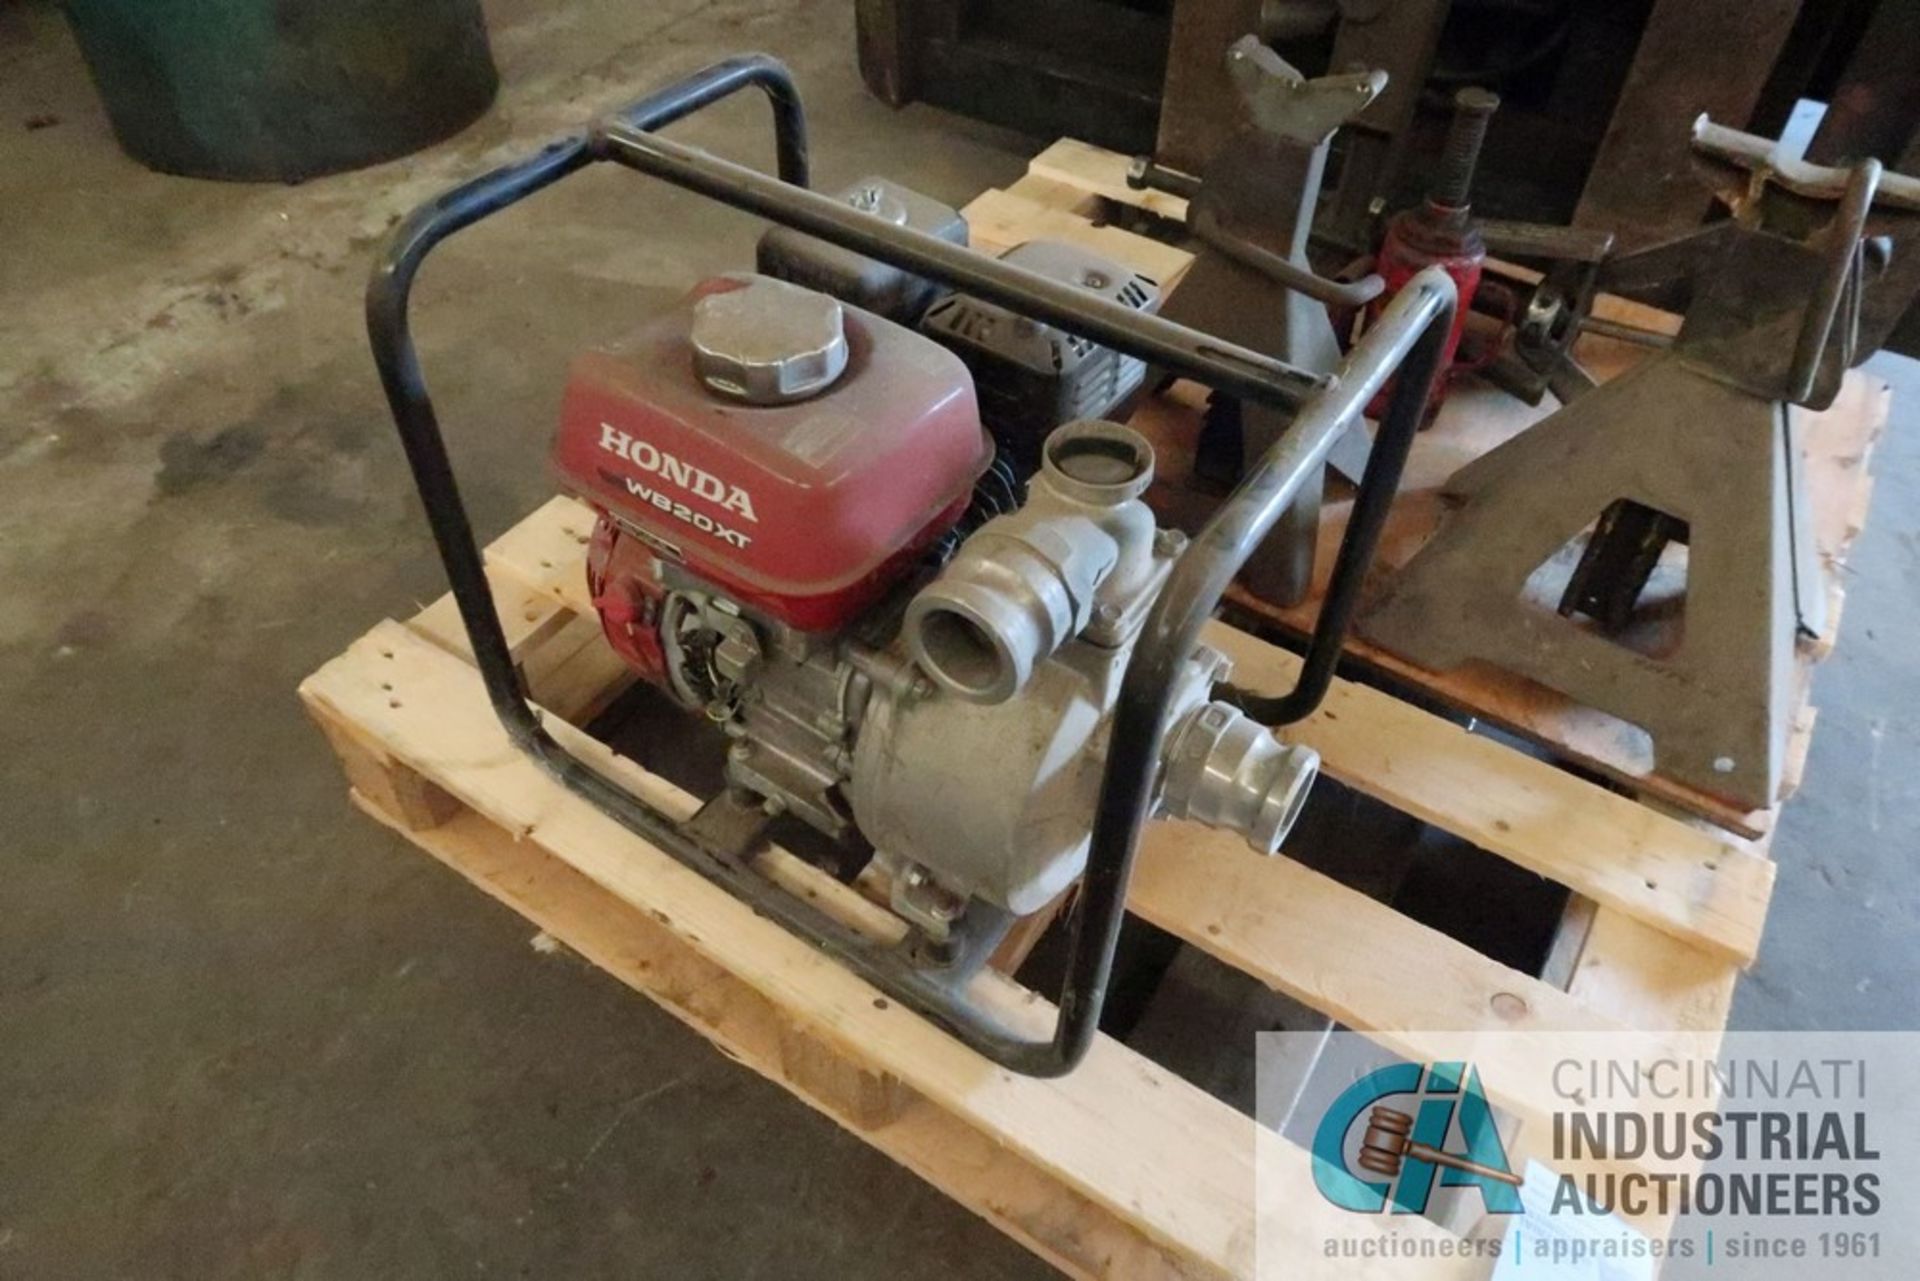 (LOT) HONDA GASOLINE WATER PUMP WITH JACK STANDS, TOE AND BOTTLE JACKS AND GEAR AND BEARING PULLER - Image 3 of 7